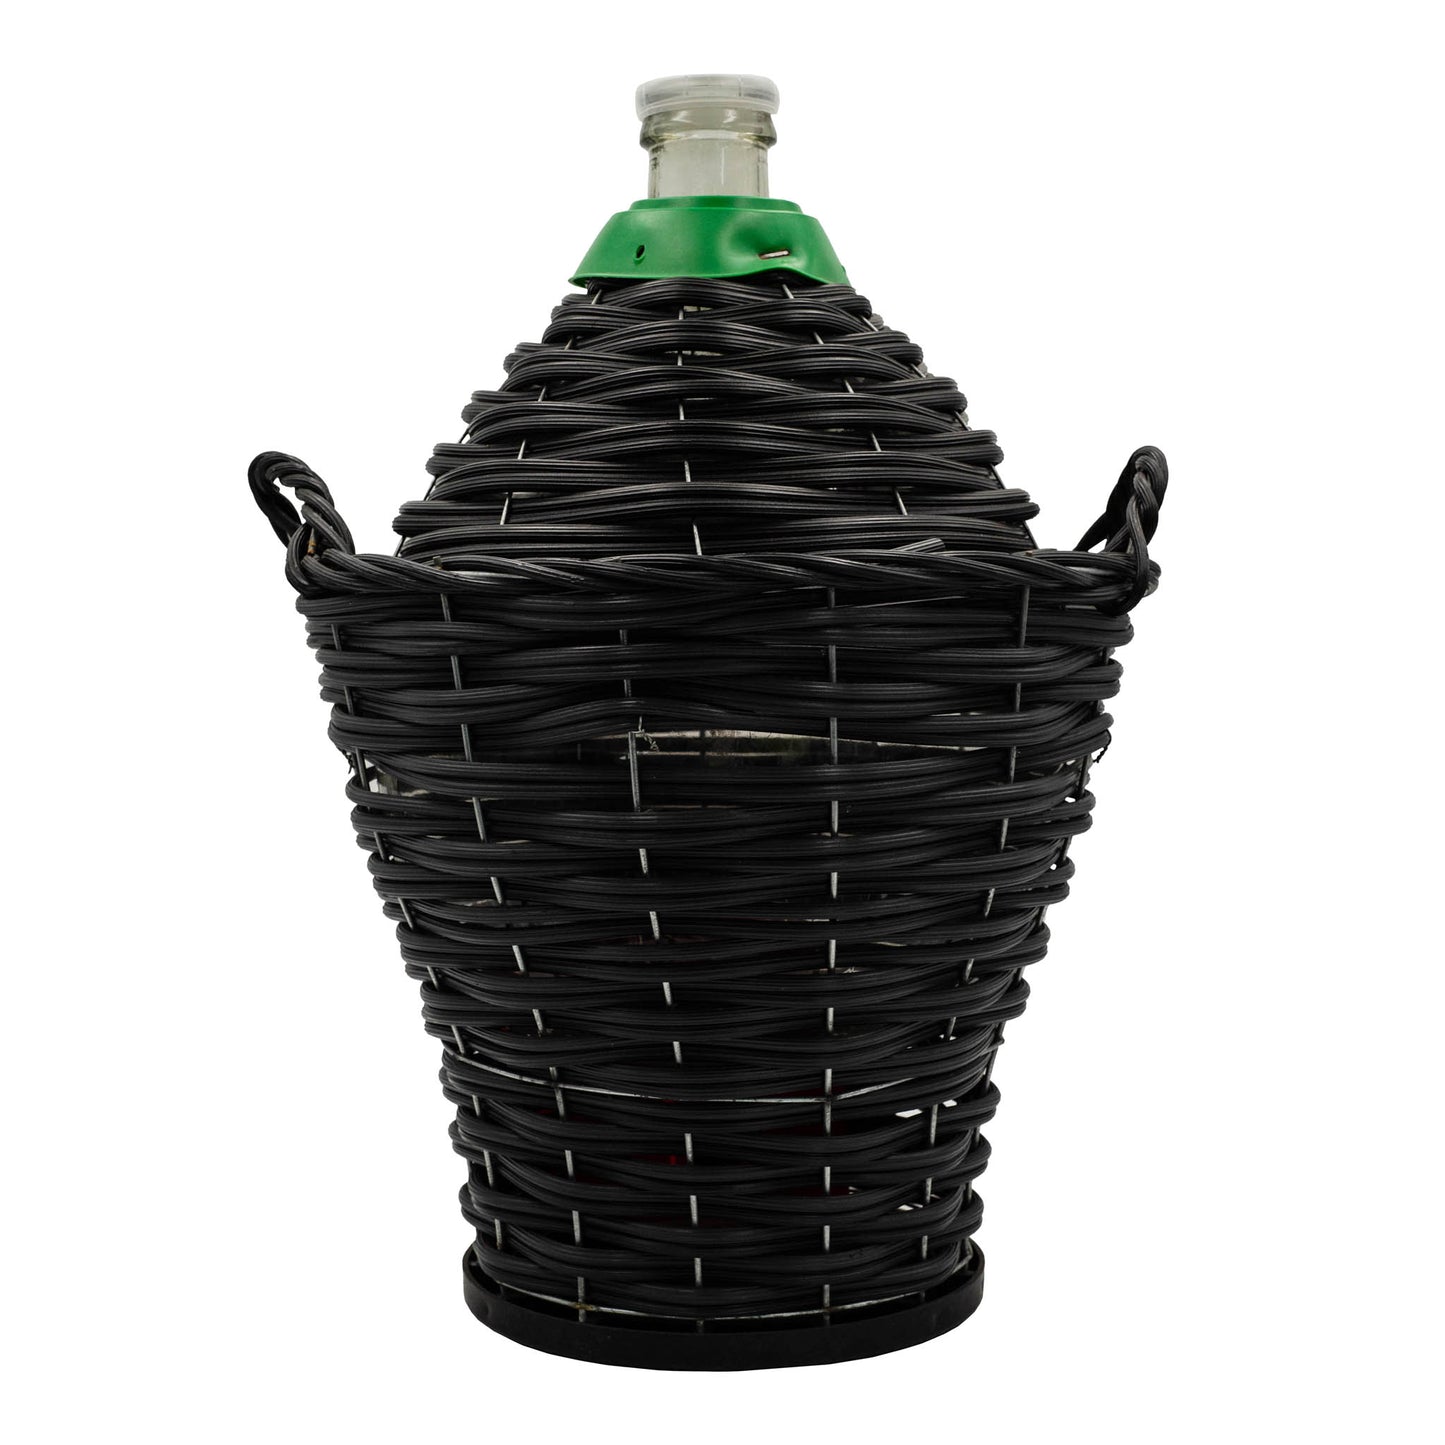 34 litre narrow neck demijohn with heavy weave basket for fermenting and storing wine. 